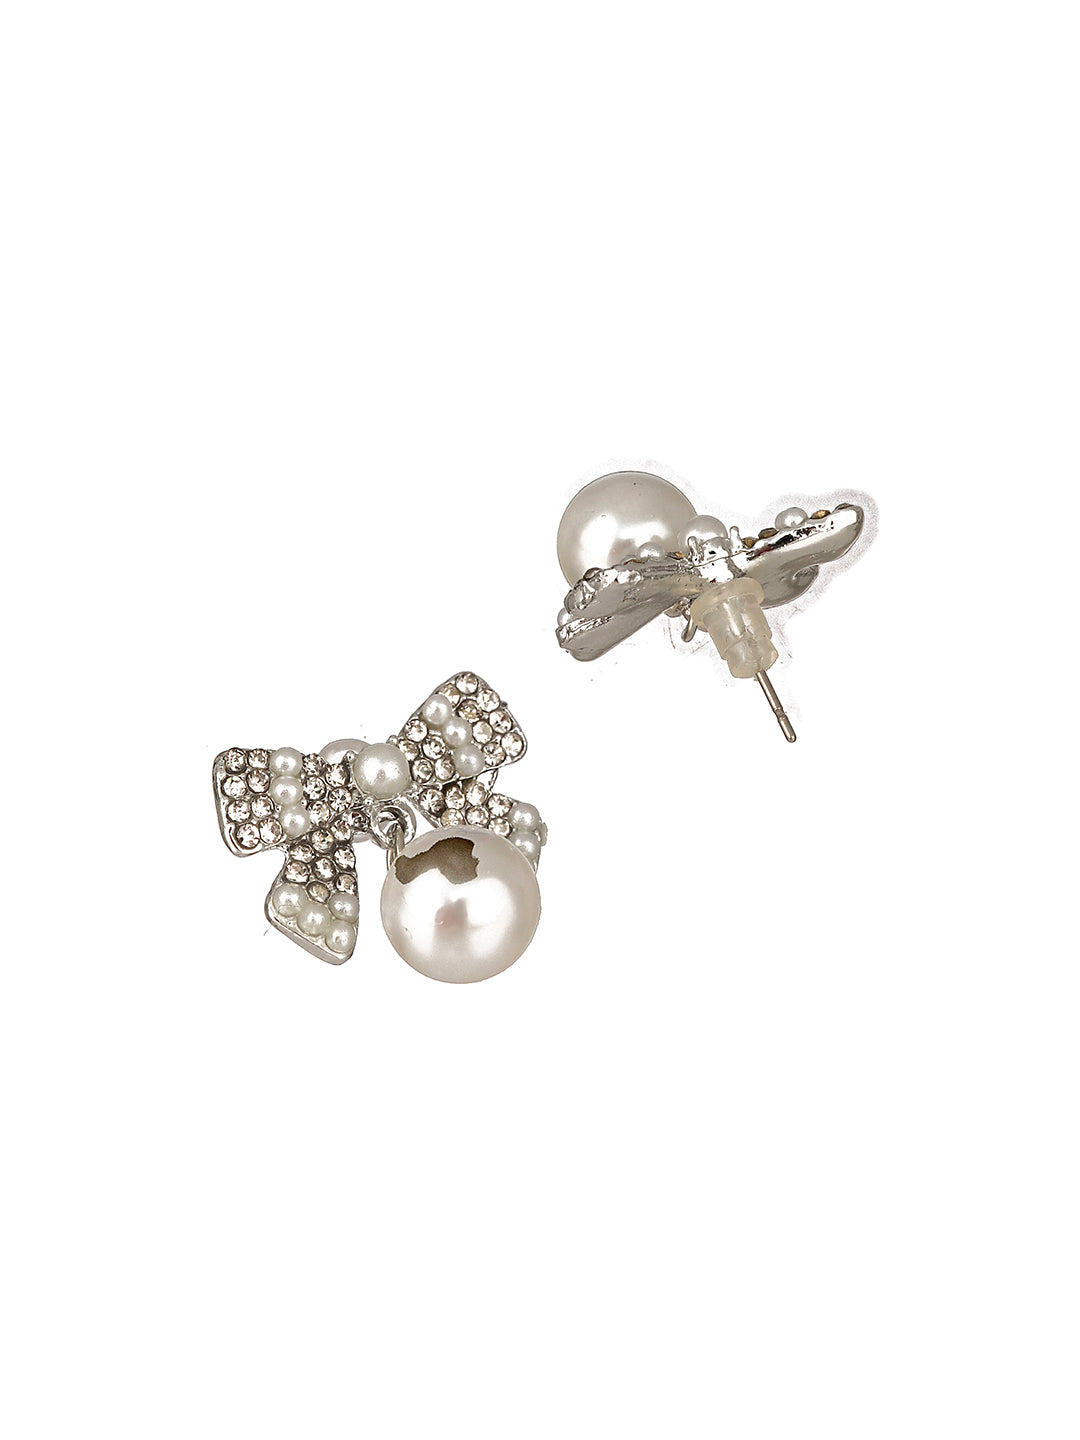 Jazz And Sizzle Silver-Toned & Rhodium-Plated CZ Bow-Shaped Pearl Drop Earrings - Jazzandsizzle